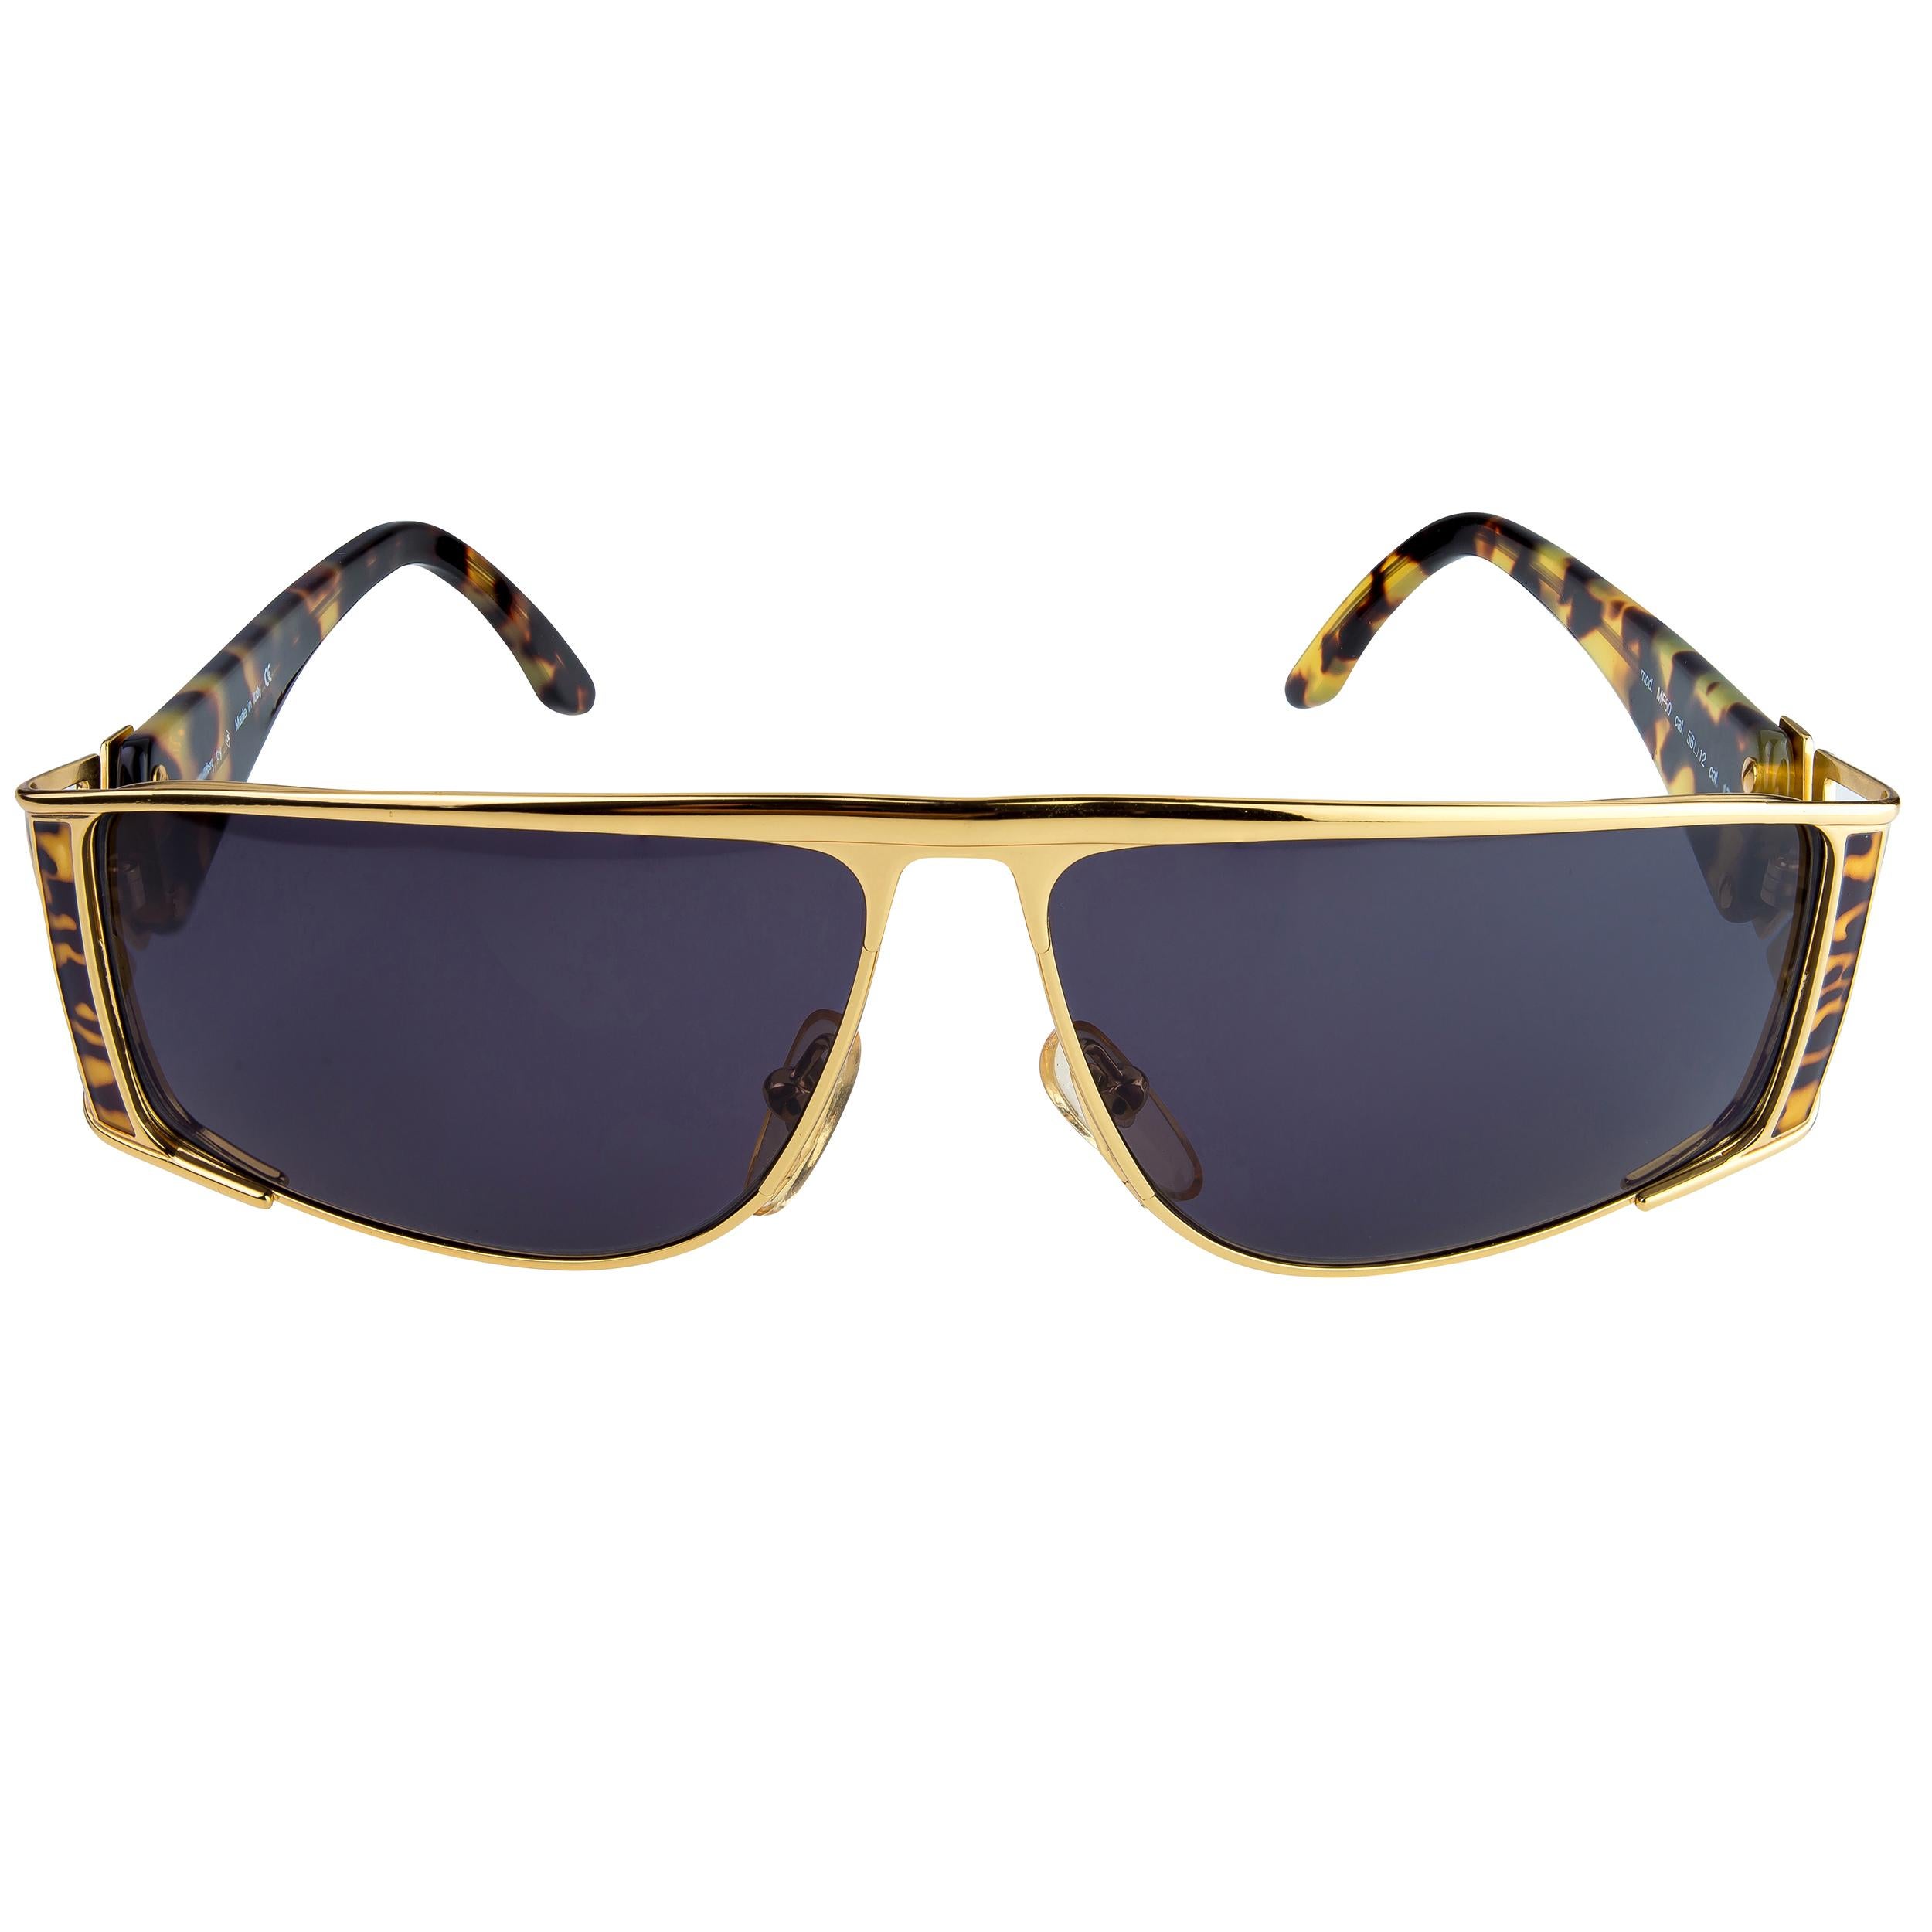 Prince Egon von Furstenberg 80s sunglasses

Before Diane, there was Egon. Egon was a prince from Switzerland and he married Diane and thus made Diane Von Furstenburg a princess. An acclaimed fashion designer, he was a contemporary of Gianni Versace,